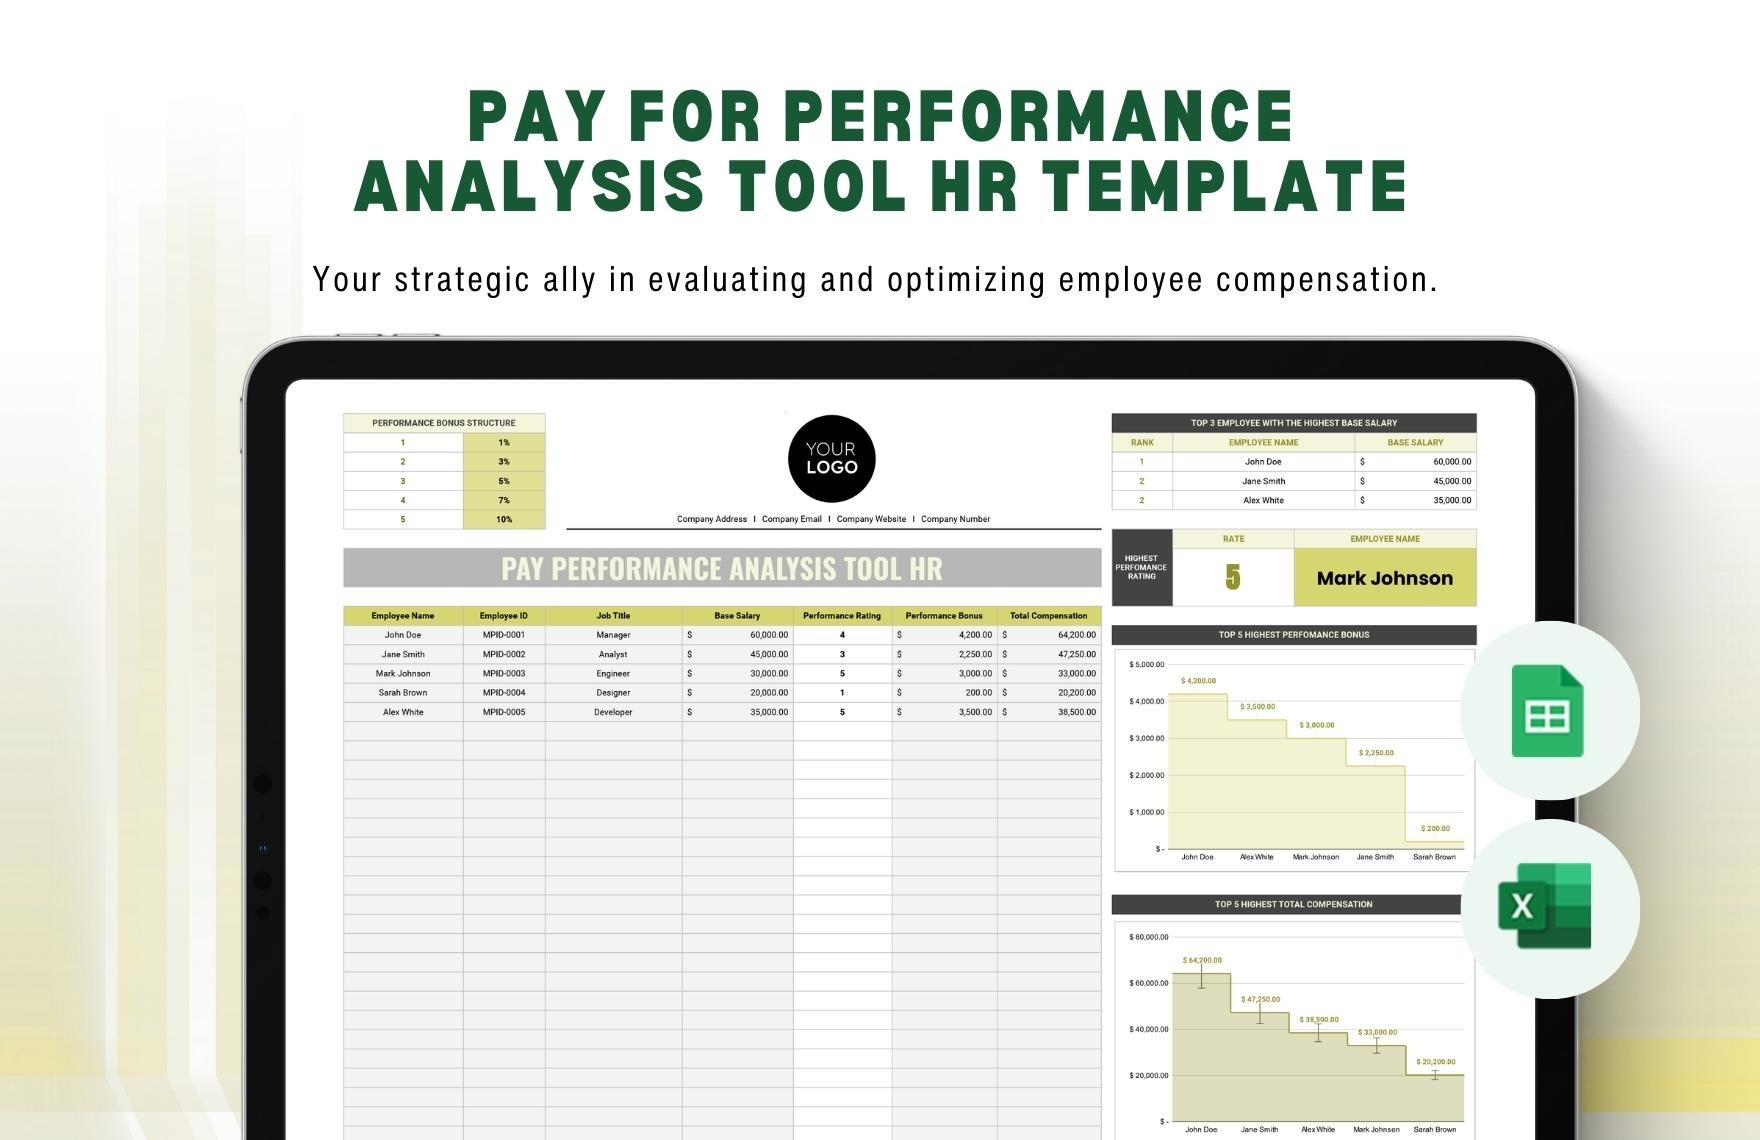 Pay for Performance Analysis Tool HR Template